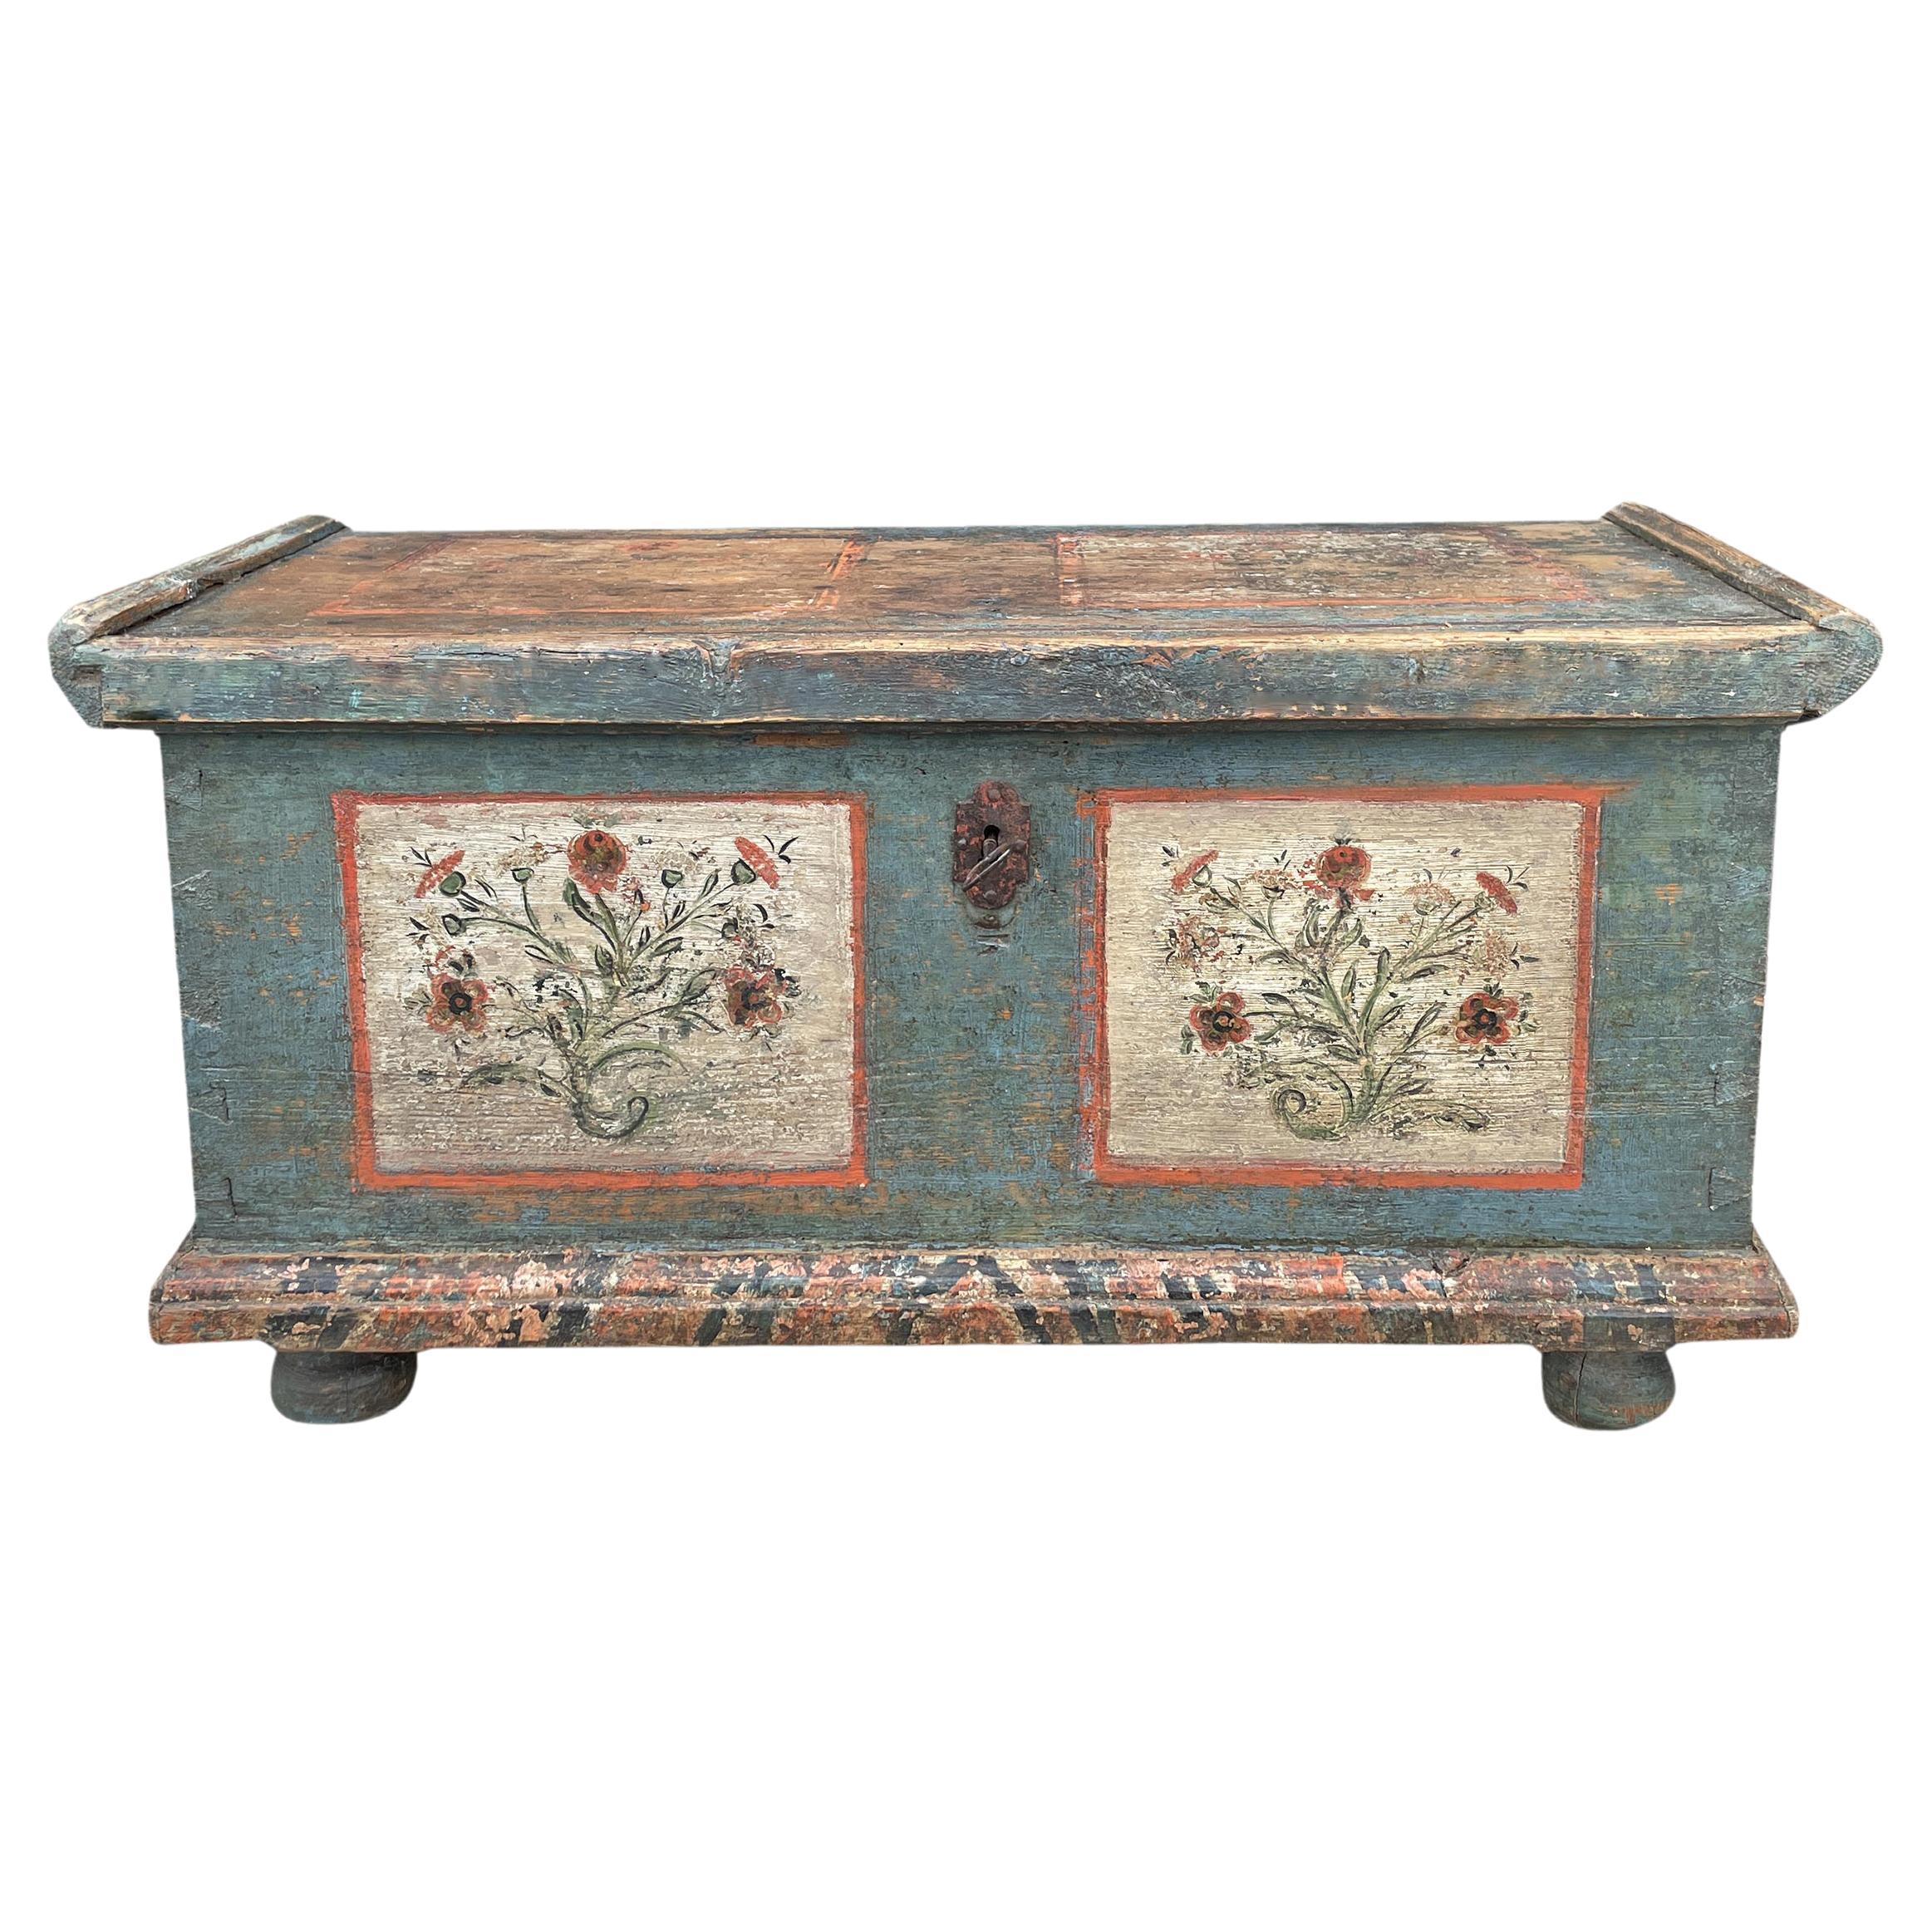 Early 19th Century Blu Floral Painted Blanket Chest